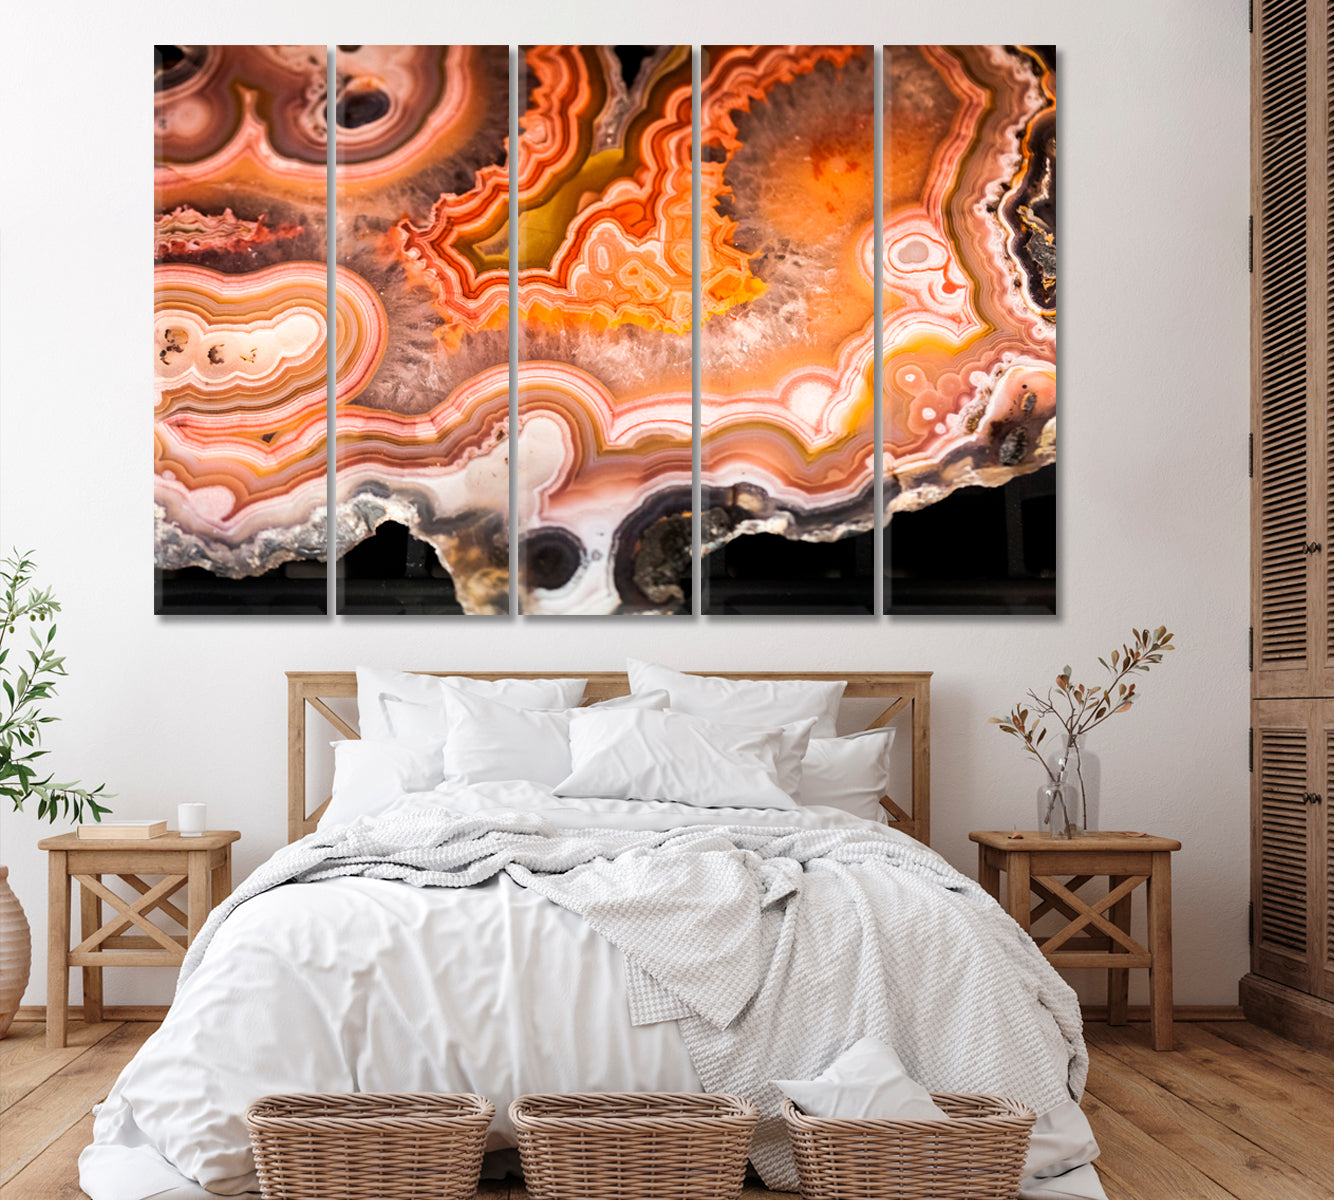 Polished Agate Stone Canvas Print ArtLexy 5 Panels 36"x24" inches 